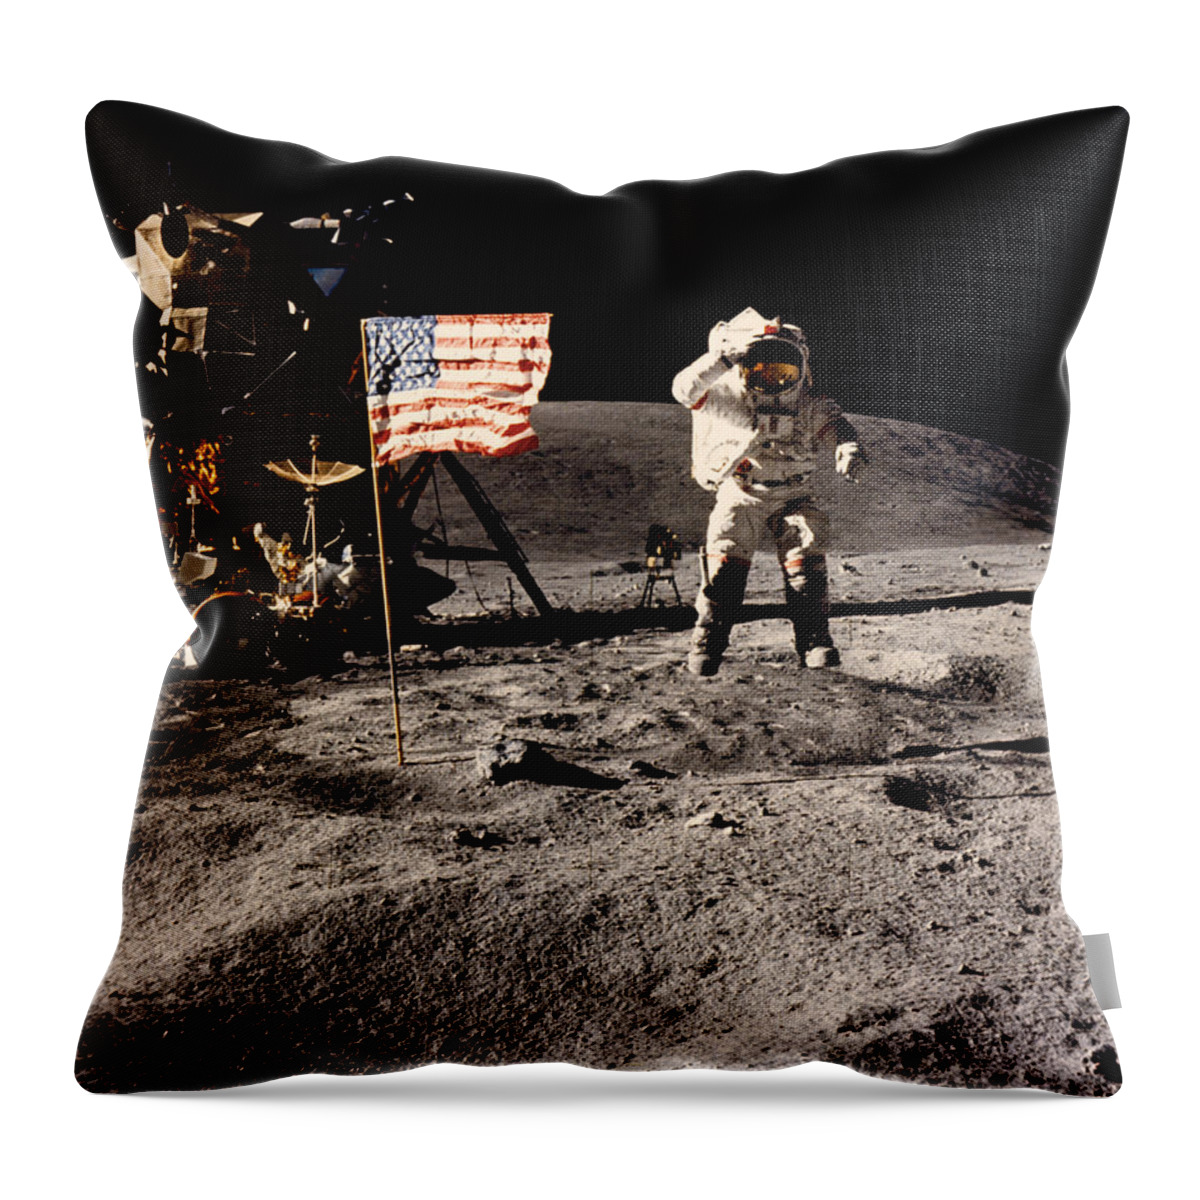 1 Person Throw Pillow featuring the photograph Leaping Lunar Flag Salute by Underwood Archives